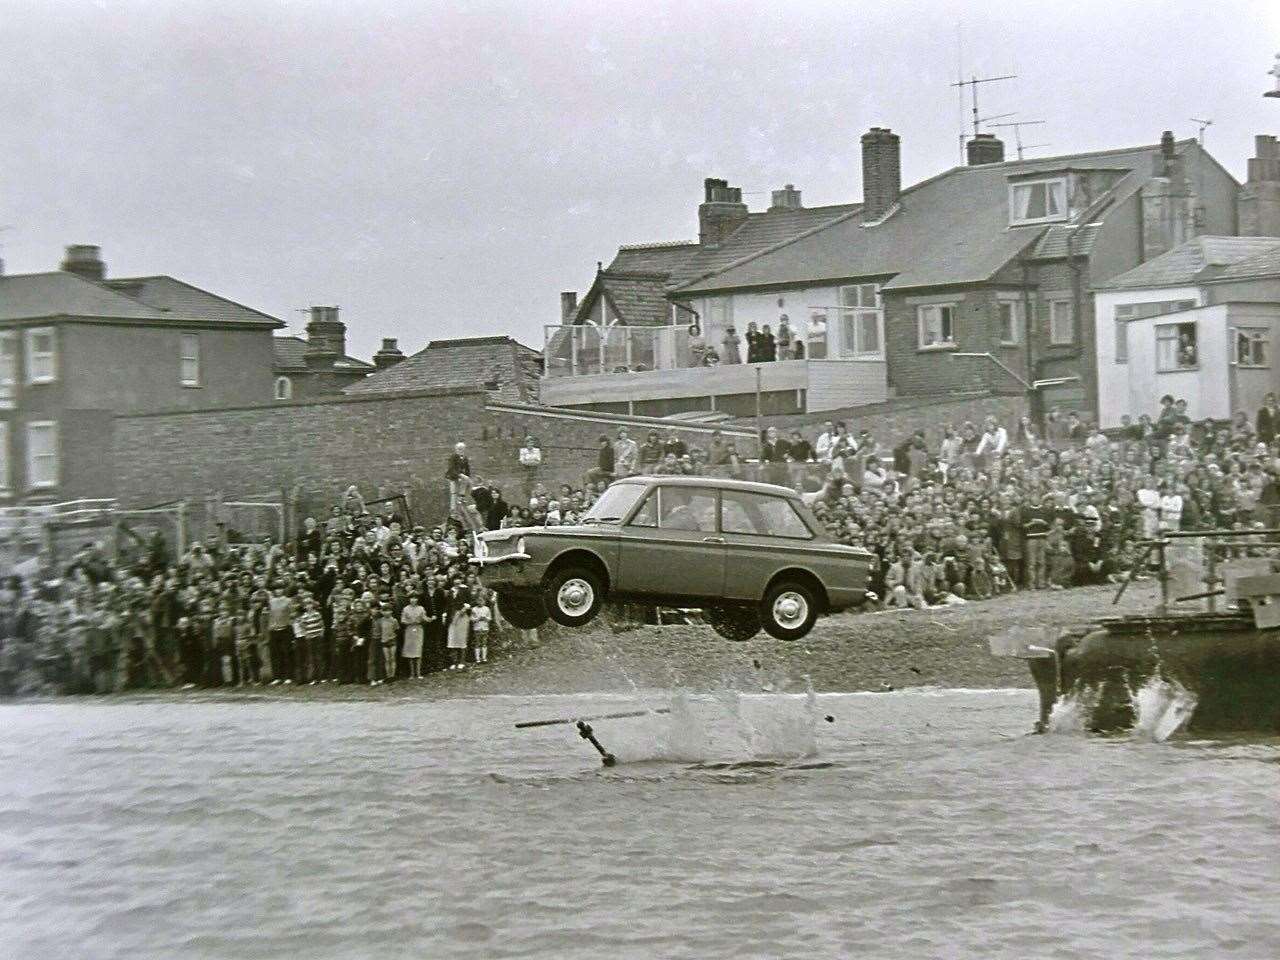 Gone! The Hillman Imp launched into the sea with Michael Crawford inside filming the 1975 Christmas special of Some Mothers Do 'Ave 'Em off Sheerness. Picture: Barry Hollis